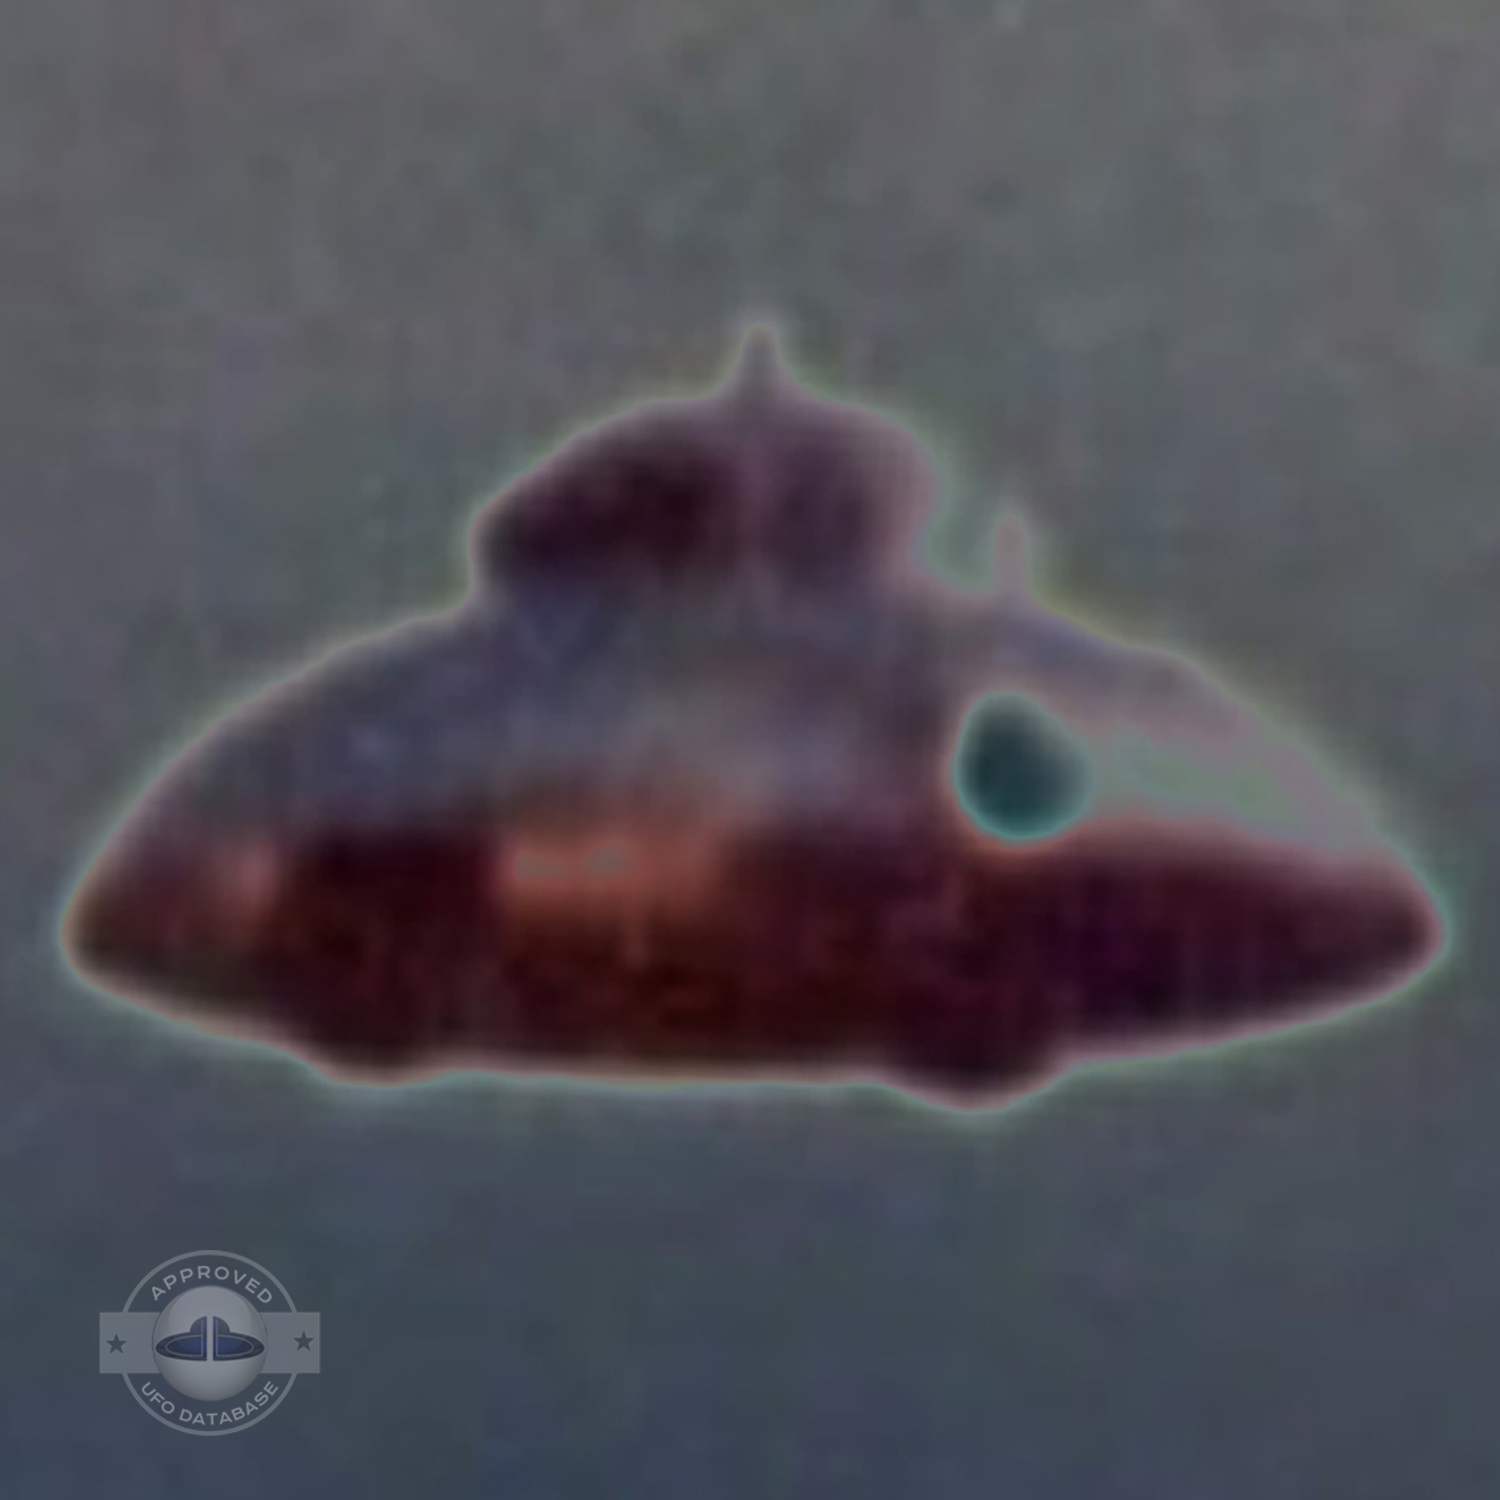 This UFO picture has been in several reports and controversies, 1970s UFO Picture #138-8